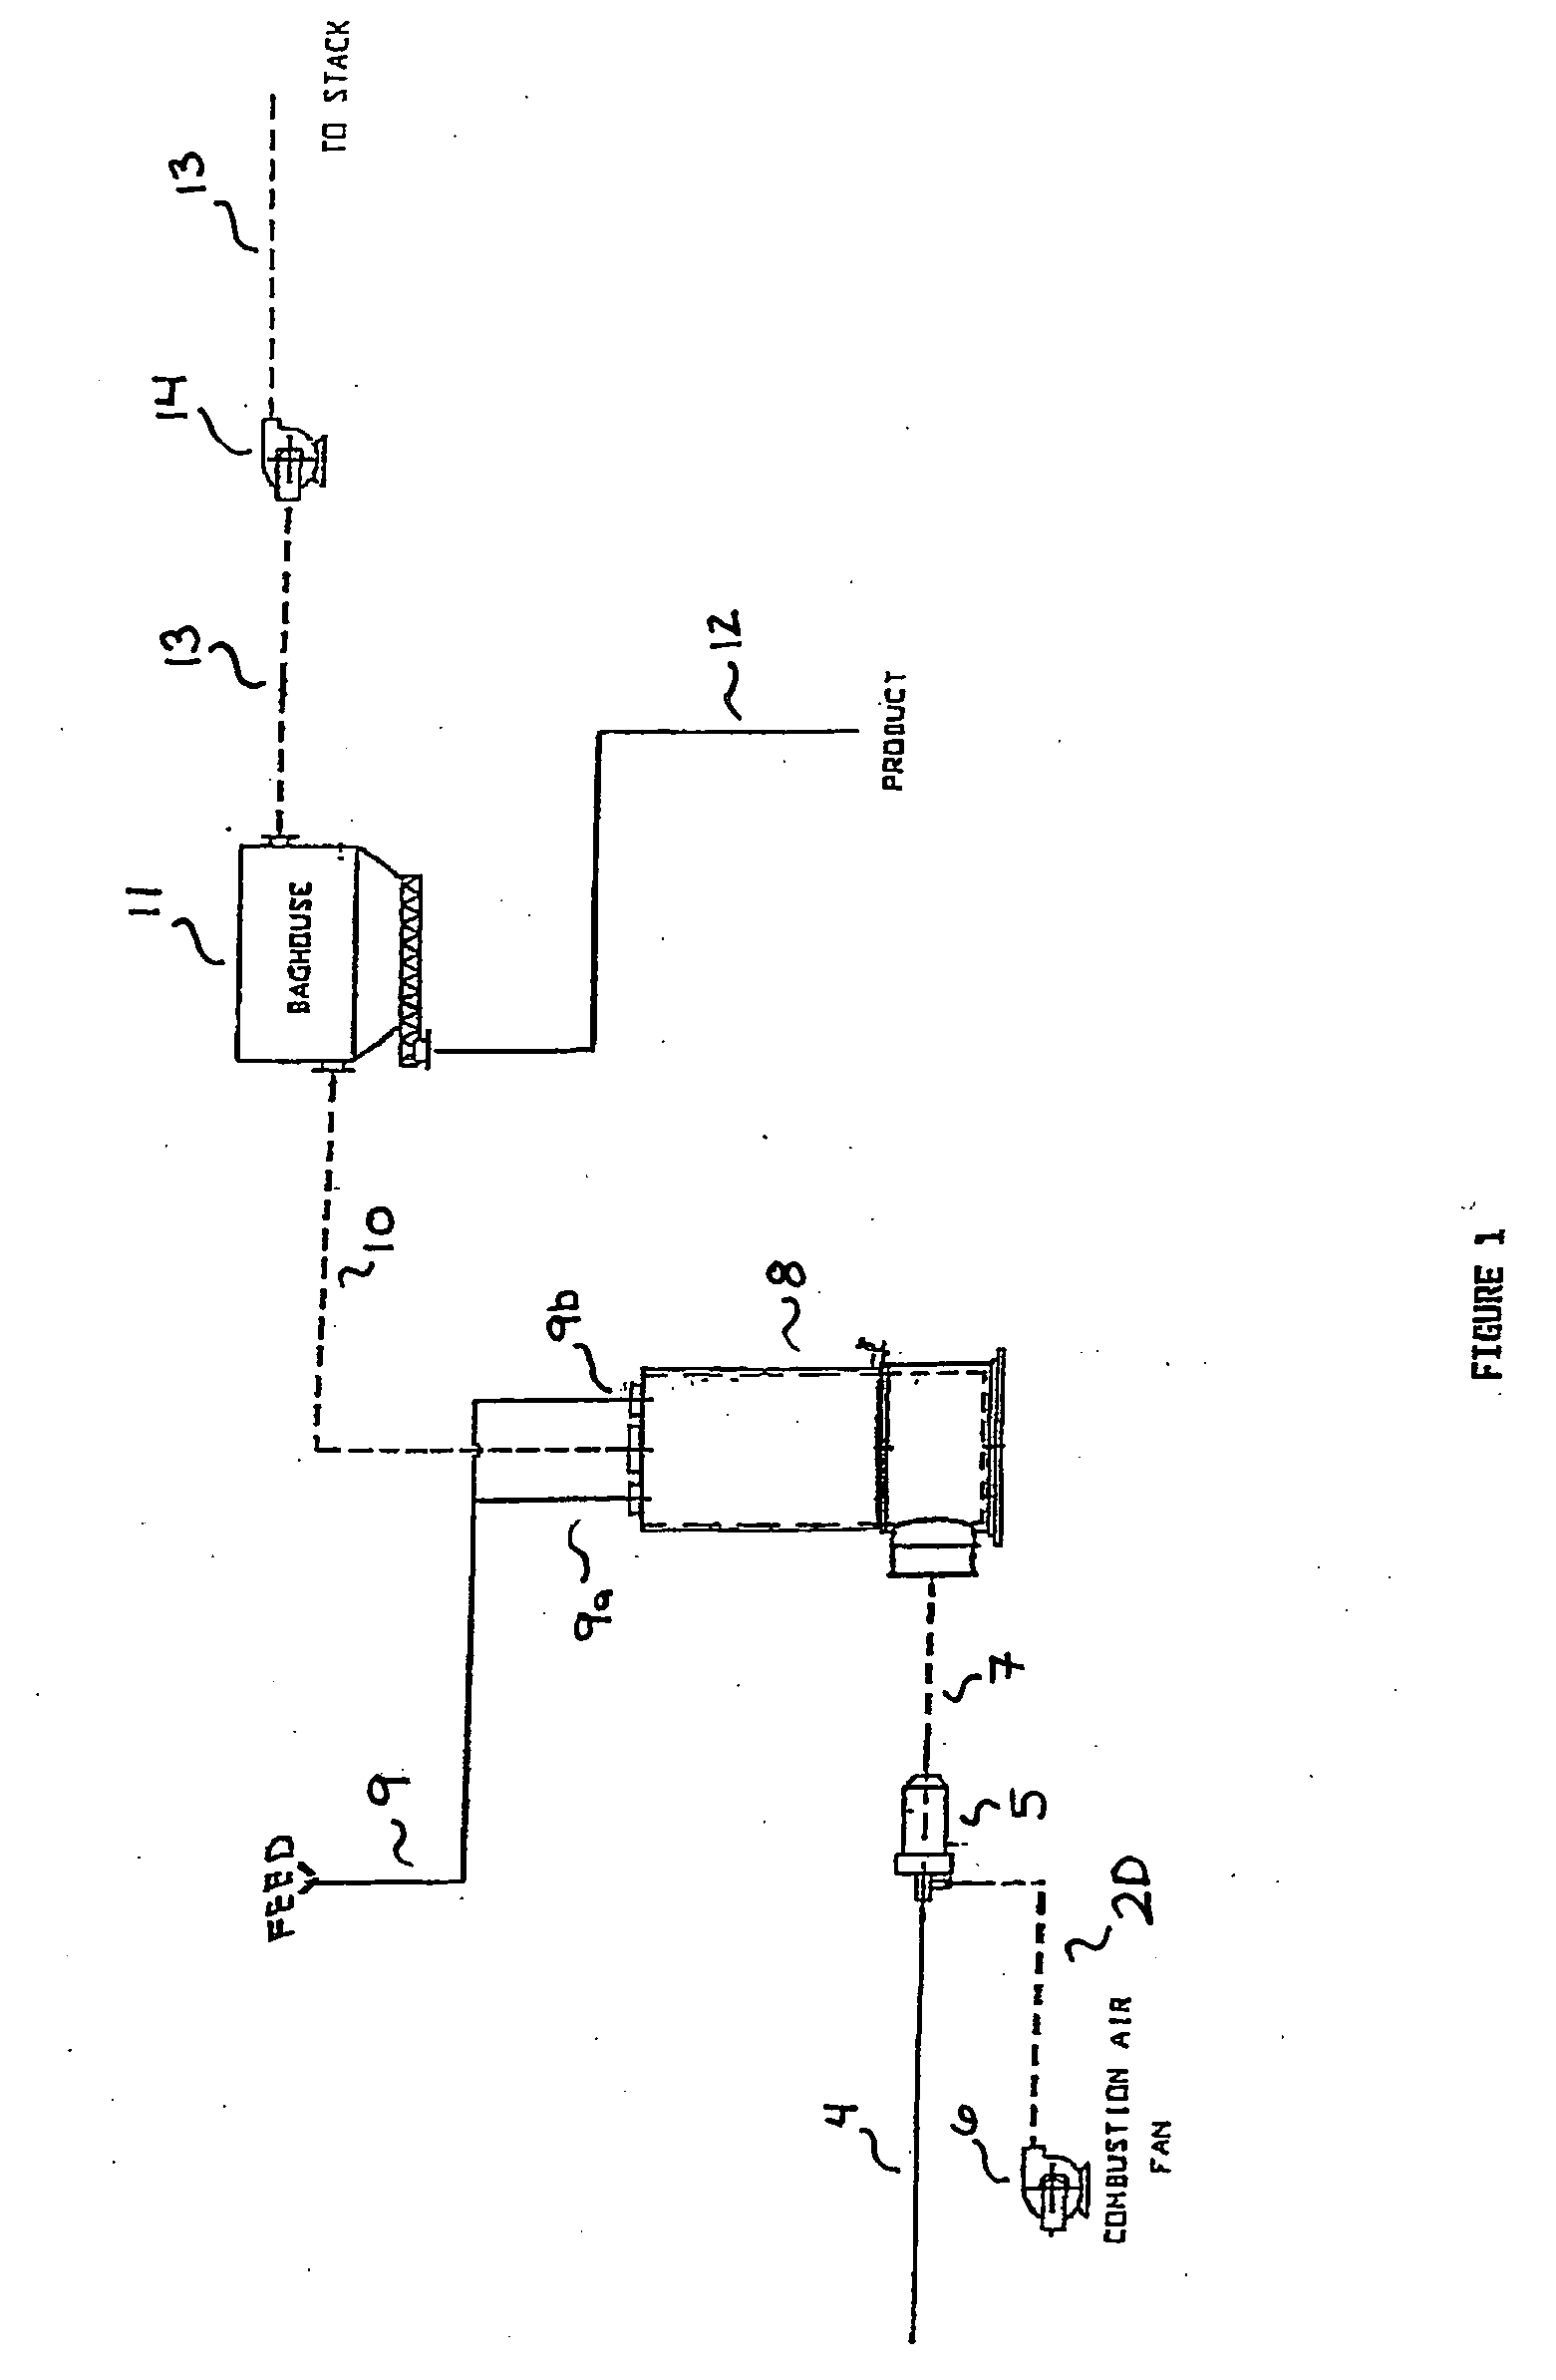 Method for drying copper sulfide concentrates